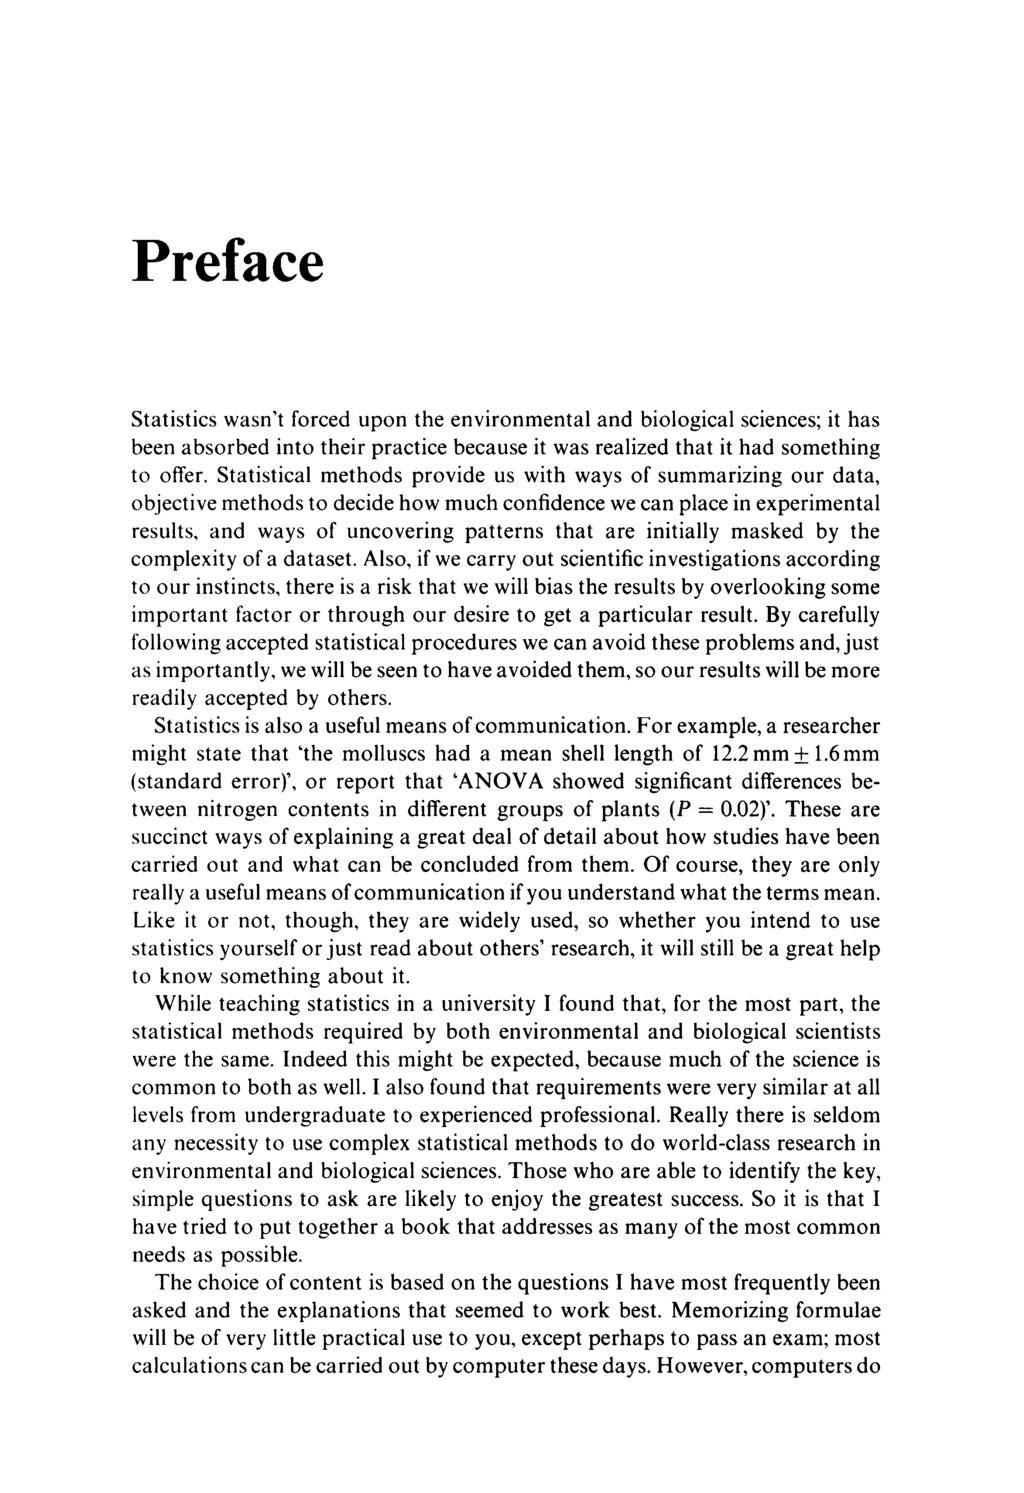 Preface Statistics wasn't forced upon the environmental and biological sciences; it has been absorbed into their practice because it was realized that it had something to offer.